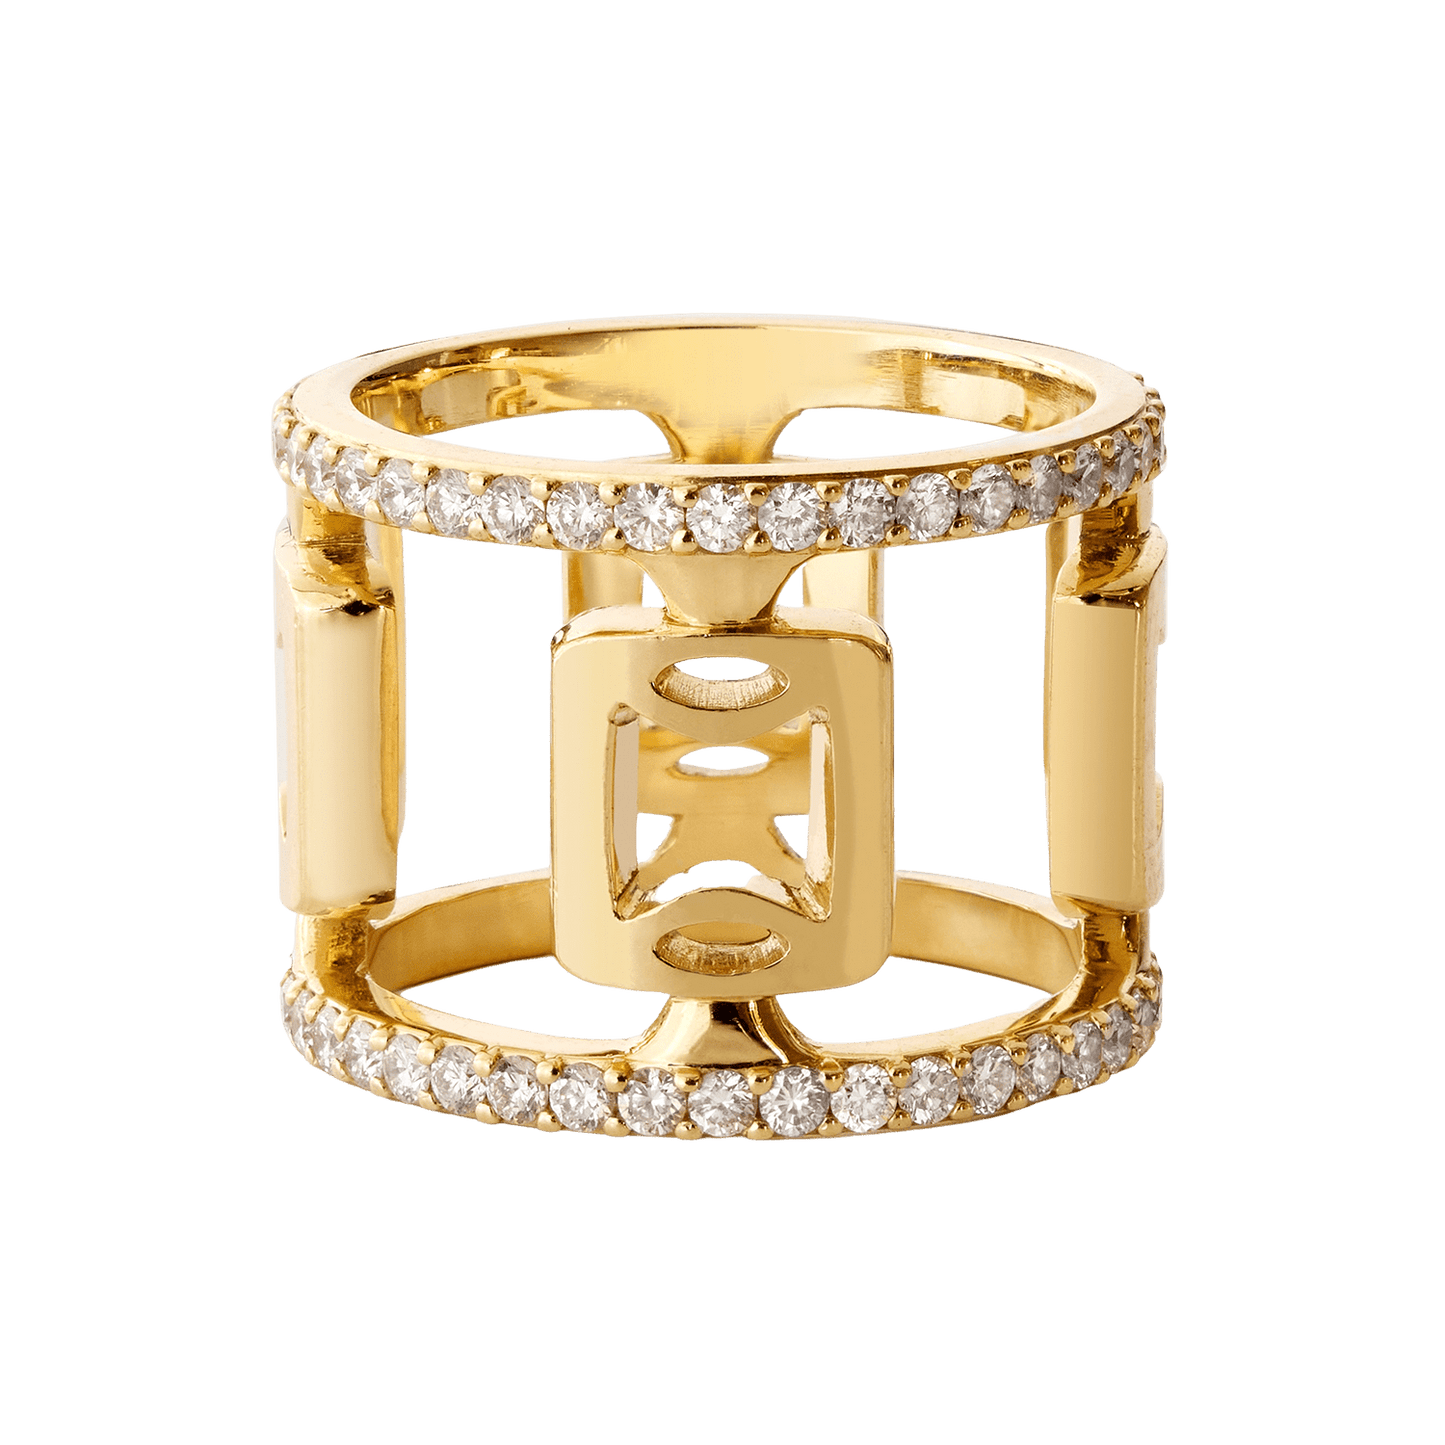 Queen’s Ring with Diamonds